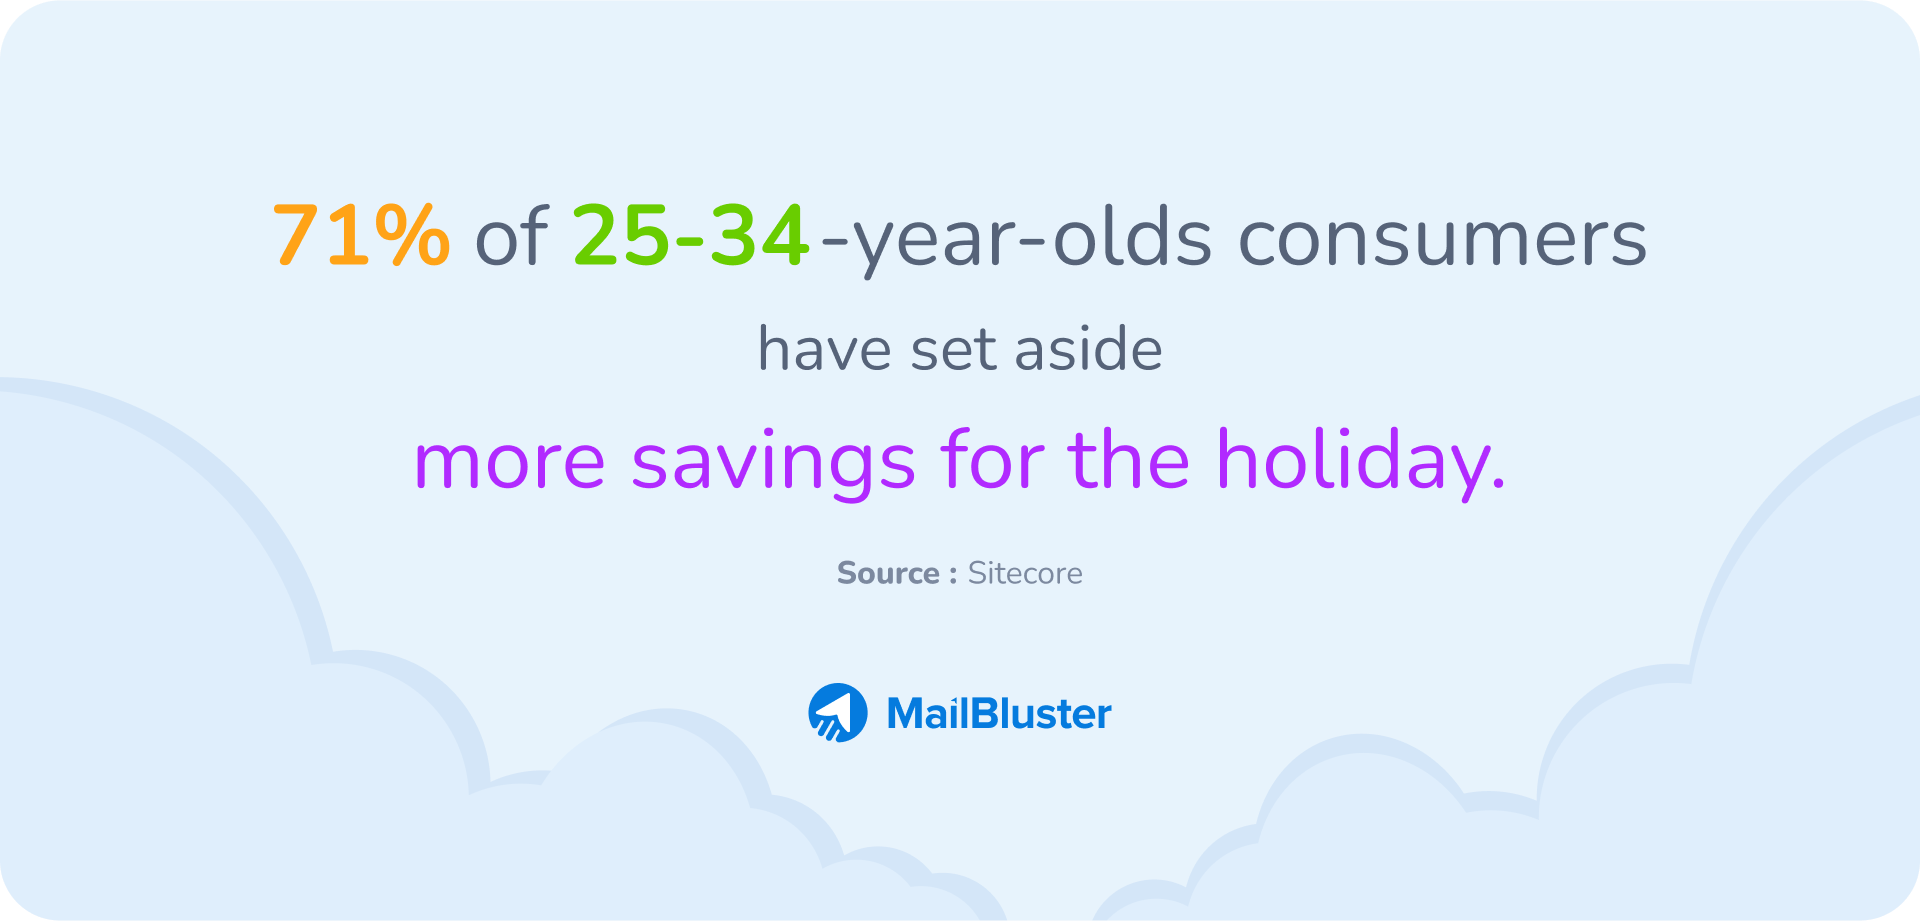 Save a little more this Black Friday by opening a savings account